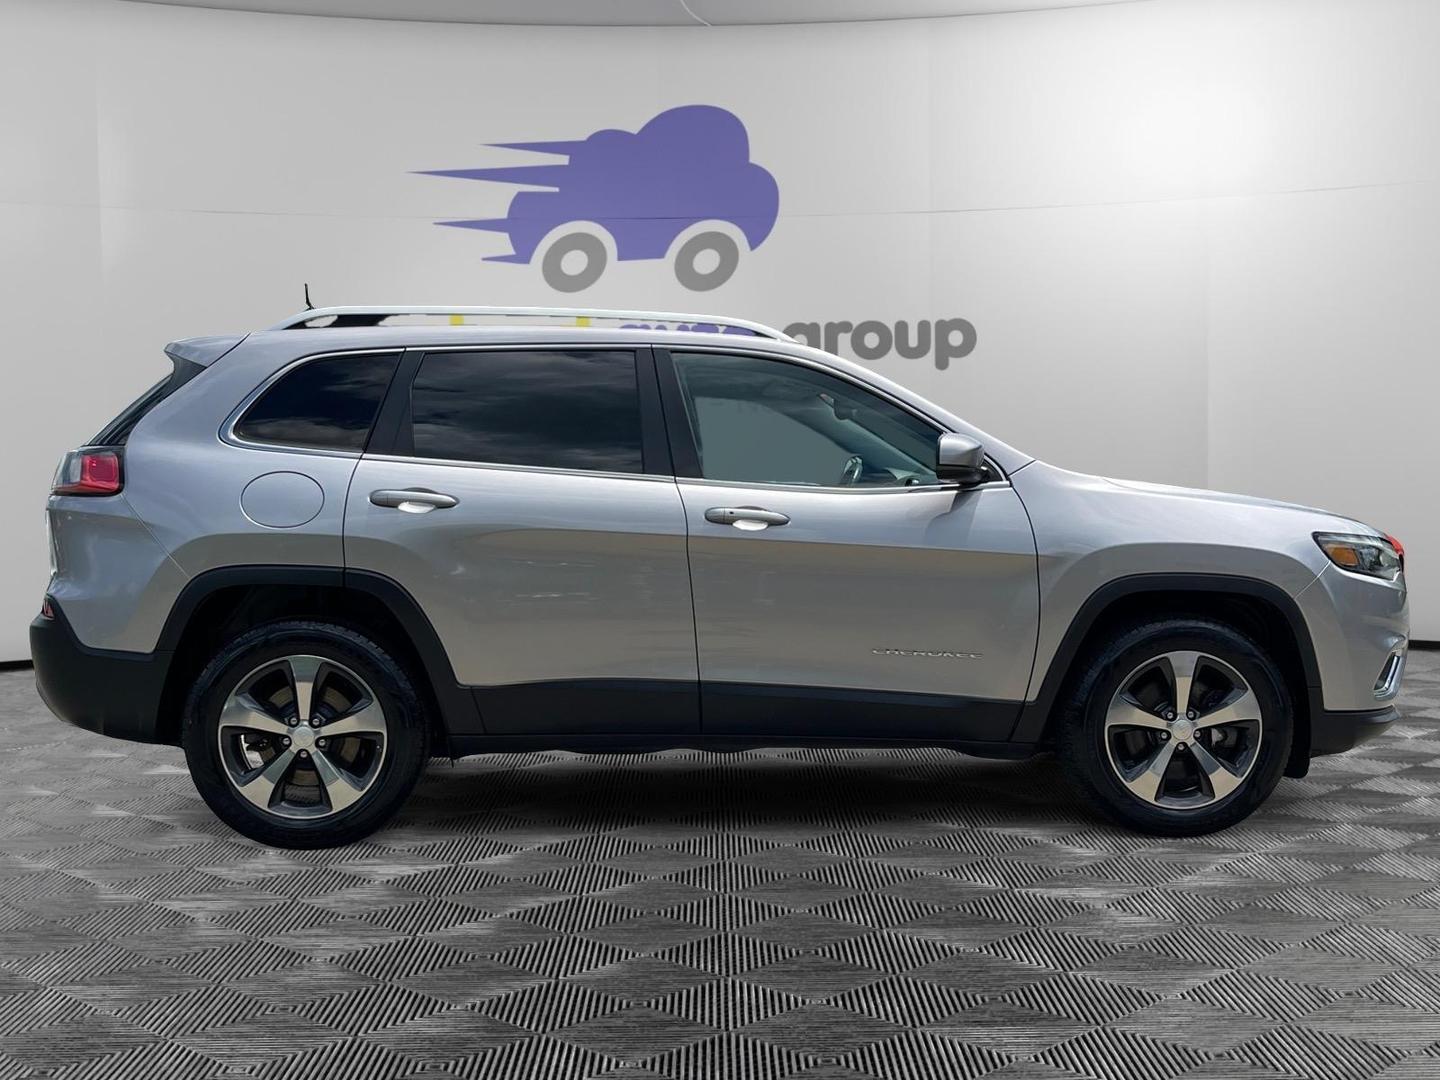 2019 Jeep Cherokee Utility 4d Limited 4wd 3.2l V6 - Image 6